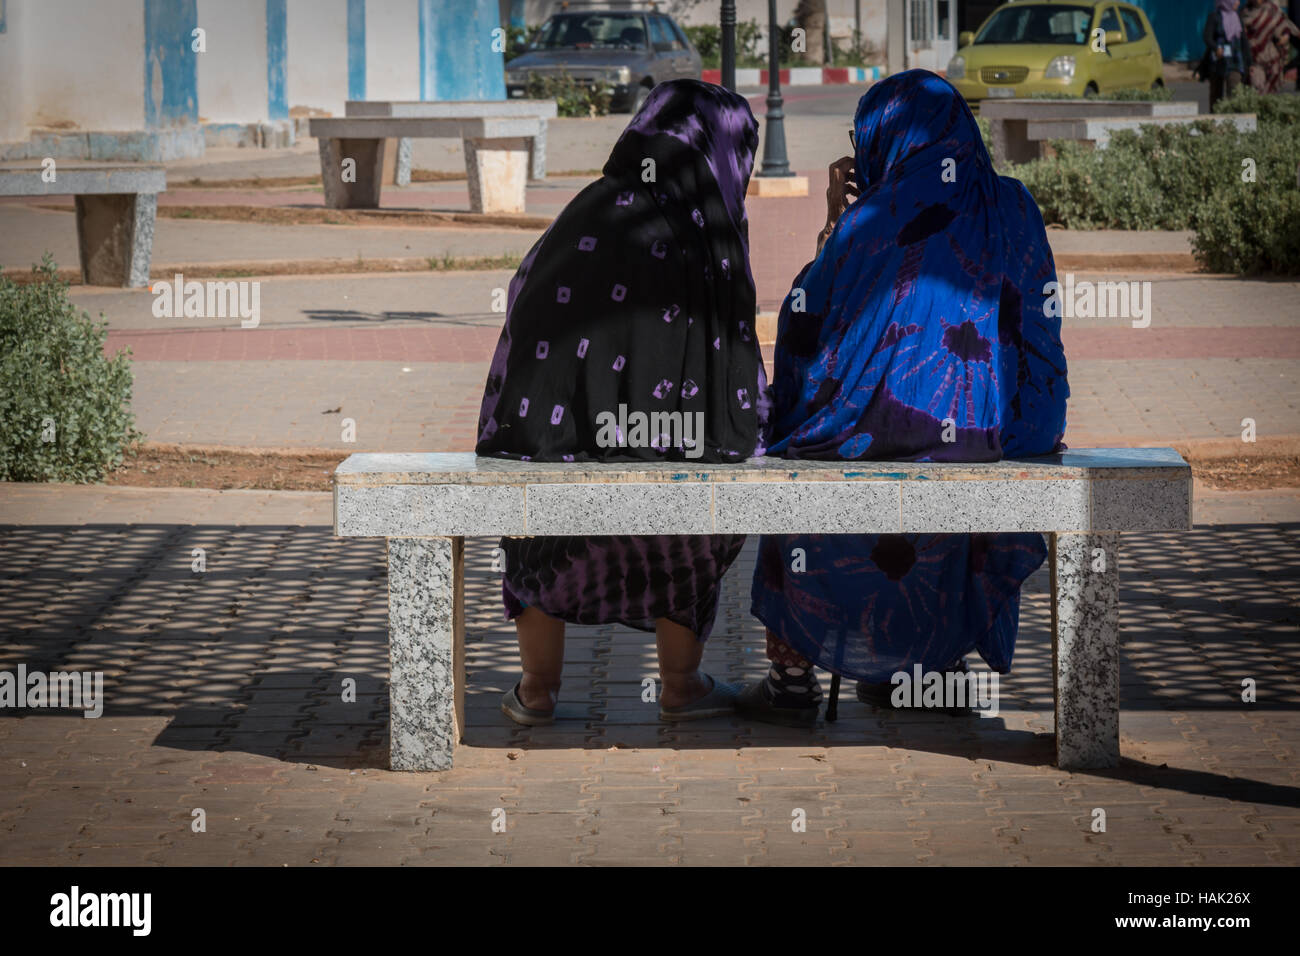 Relax on a bench during a hot summer day. Two arabian wreathed women talking while sitting on a bench. Stock Photo